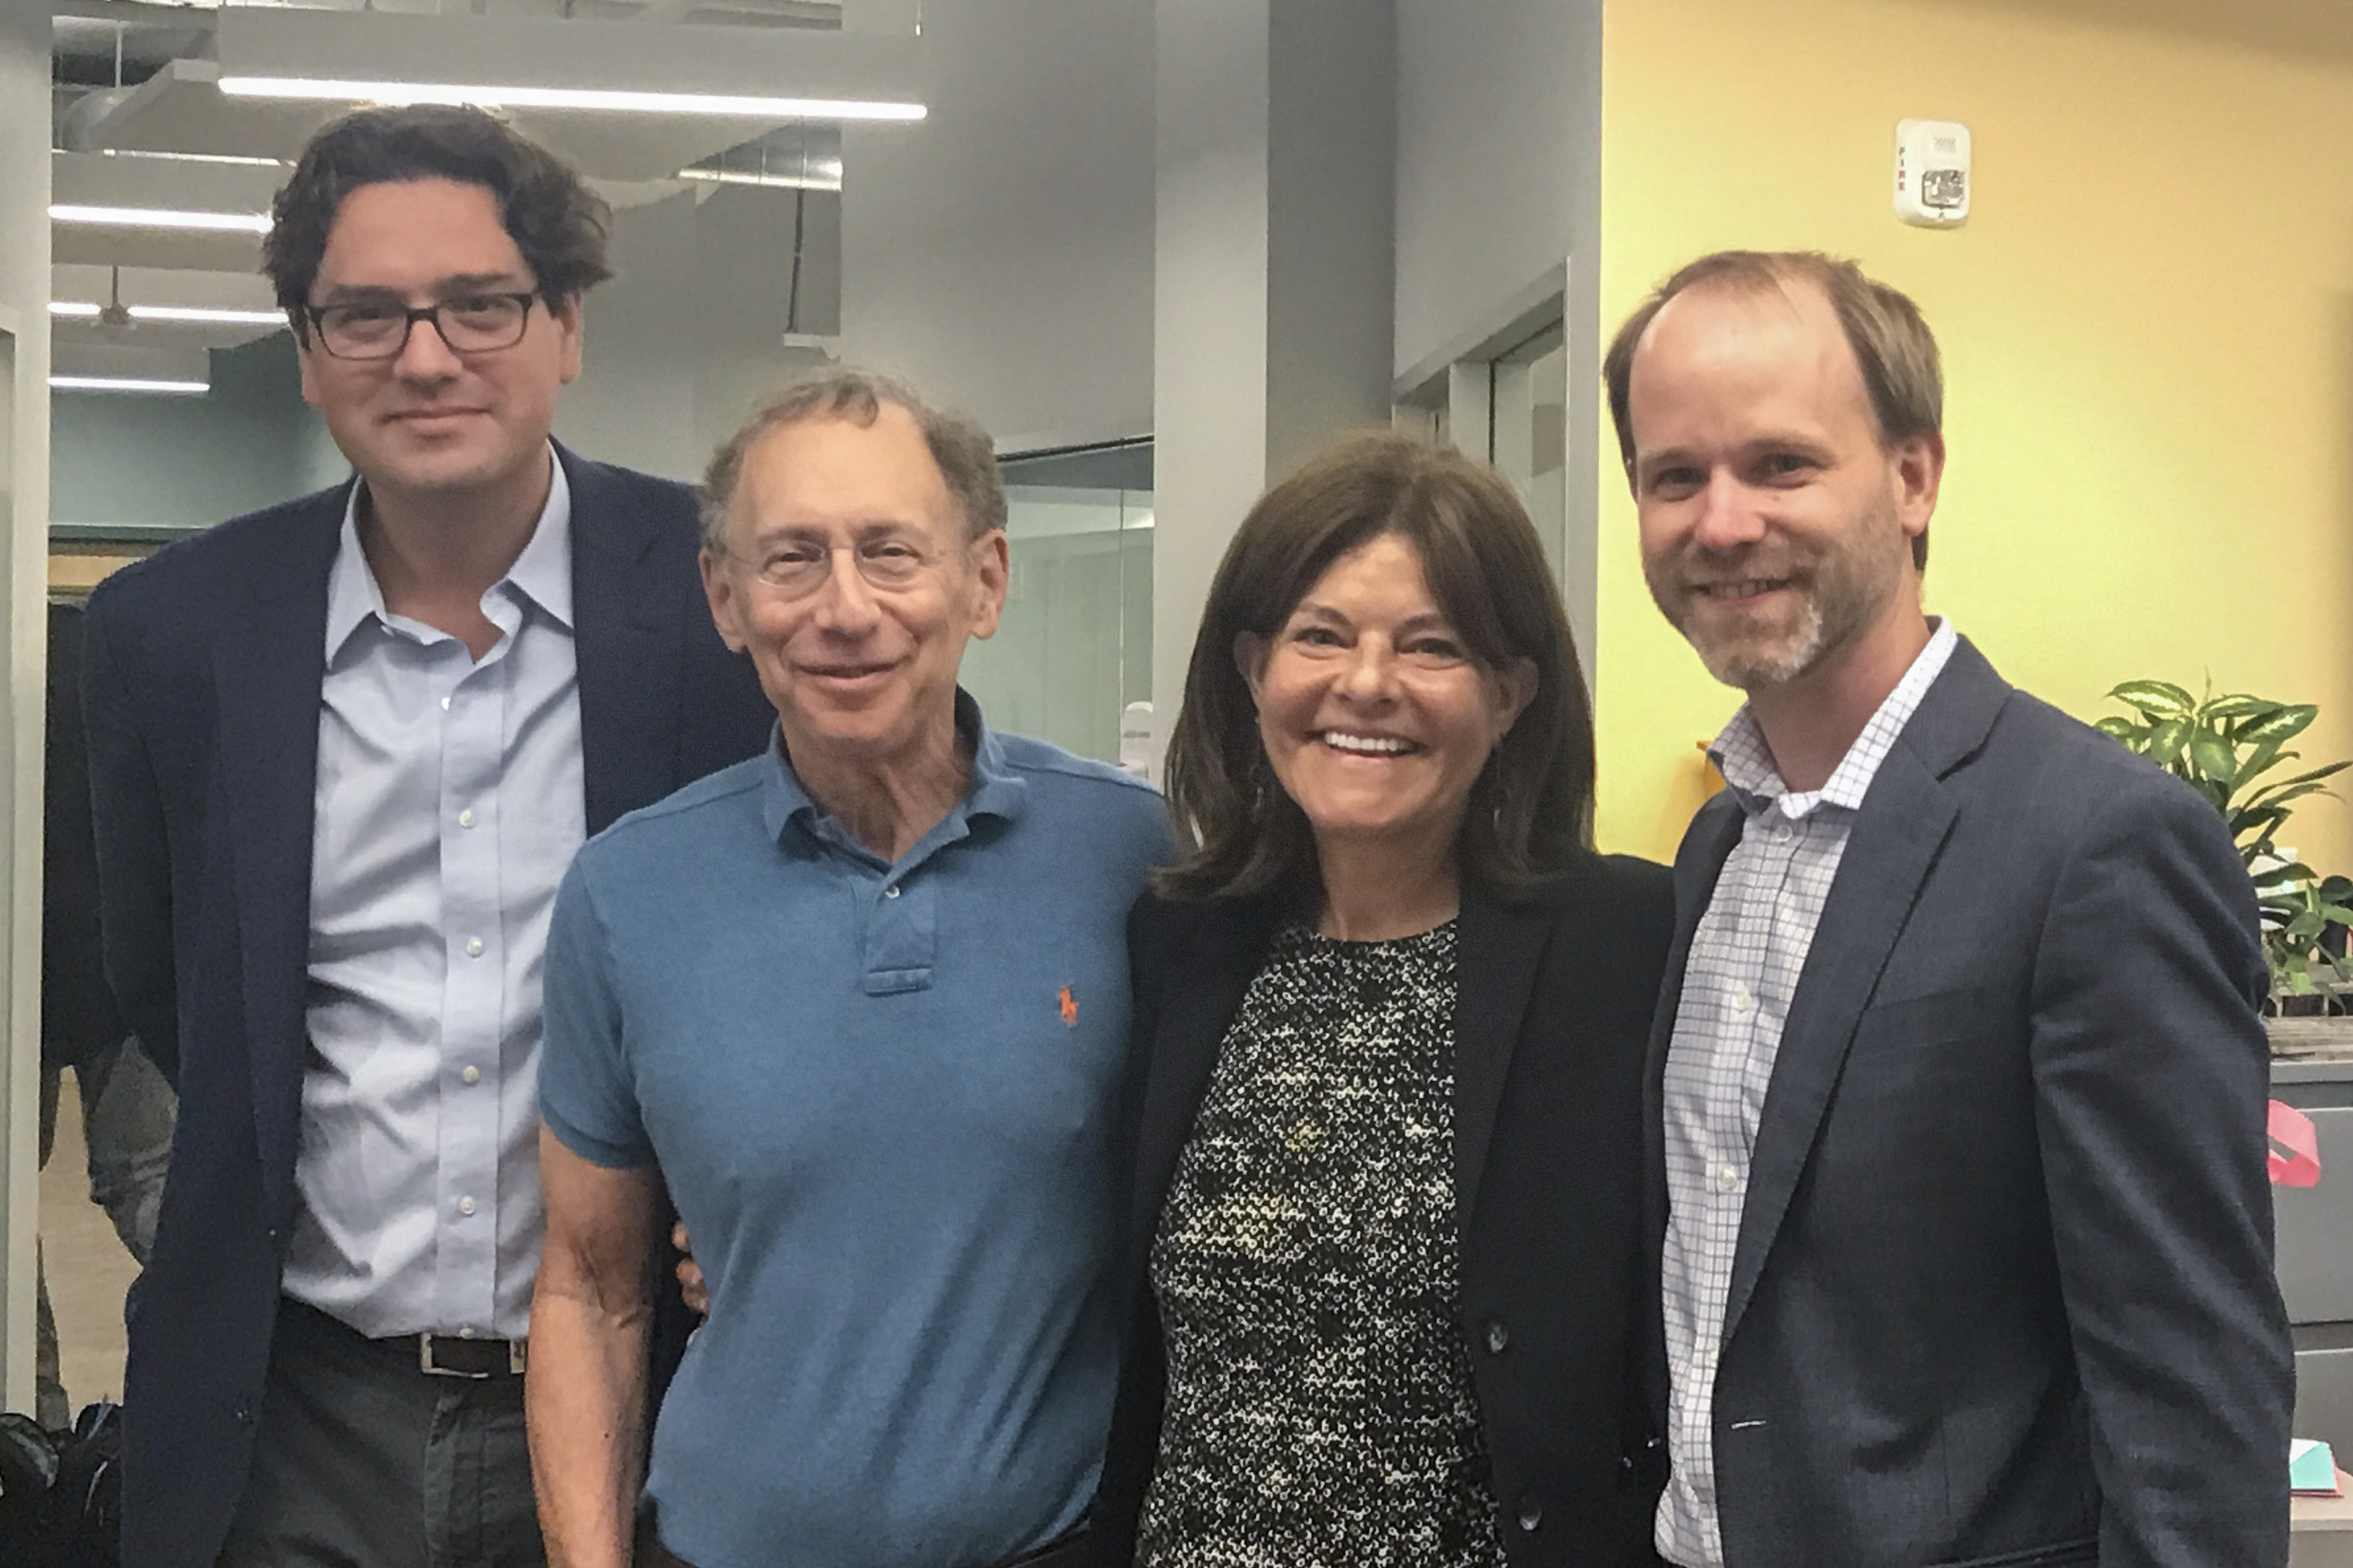 Lyndra’s Co-Founders: Giovanni Traverso, Ph.D., Robert Langer, Sc.D., Amy Schulman and Andrew Bellinger, M.D., Ph.D. (Lyndra Therapeutics)